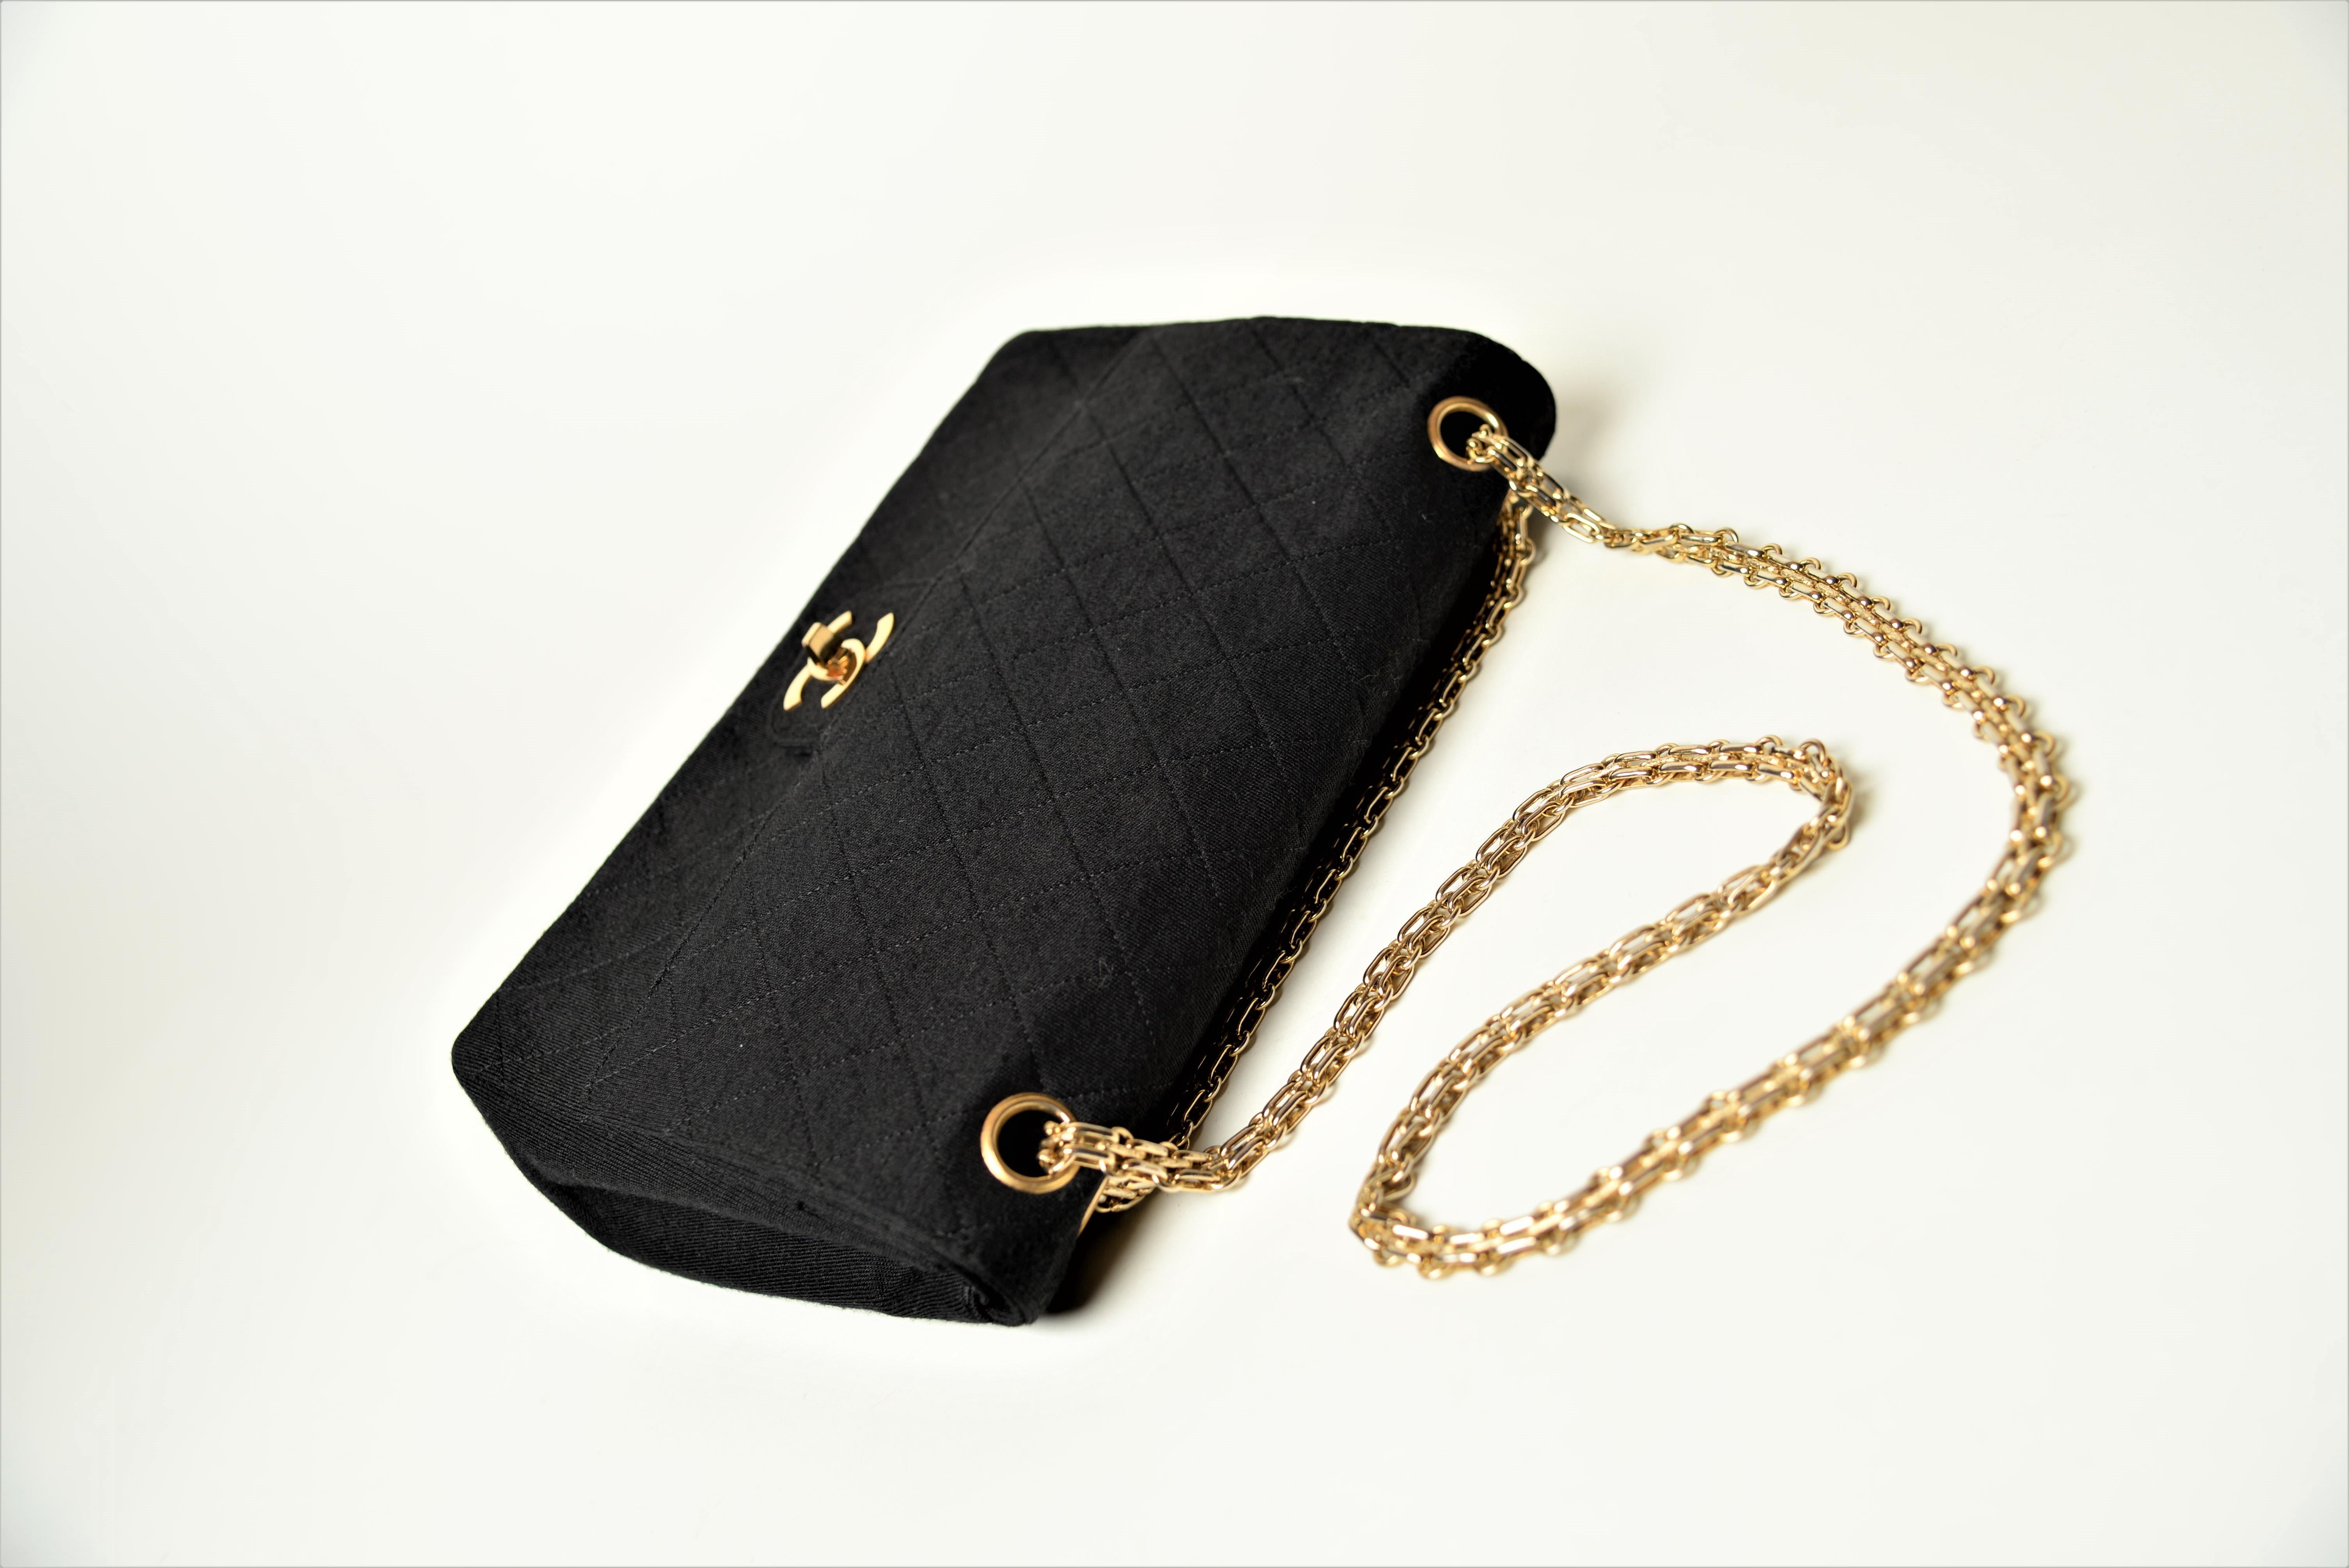 Black Chanel Classic Flap Jersey 2.55 Vintage Reissue Chain